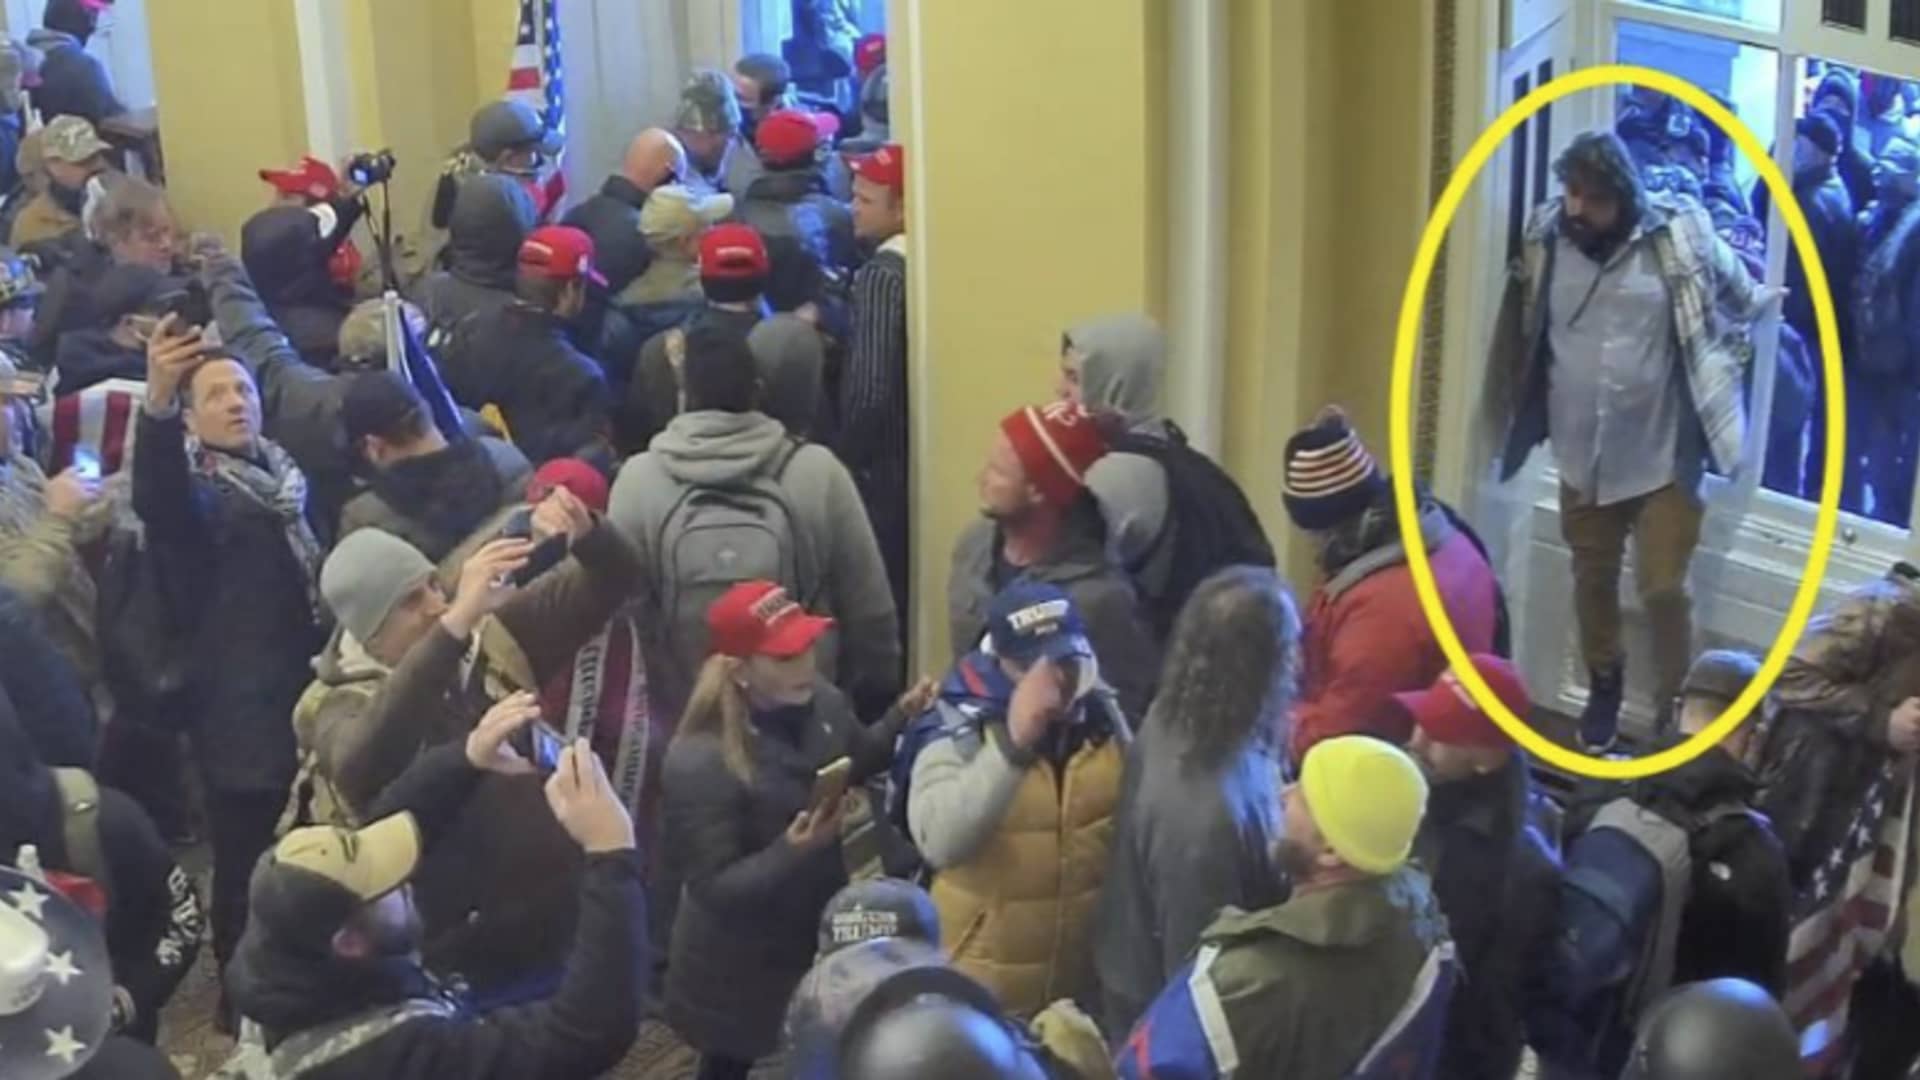 Included in a D.O.J. Statement of facts, photo (circled in yellow) shows Daniel Christmann entering the U.S Capitol on Jan. 6th, 2021.